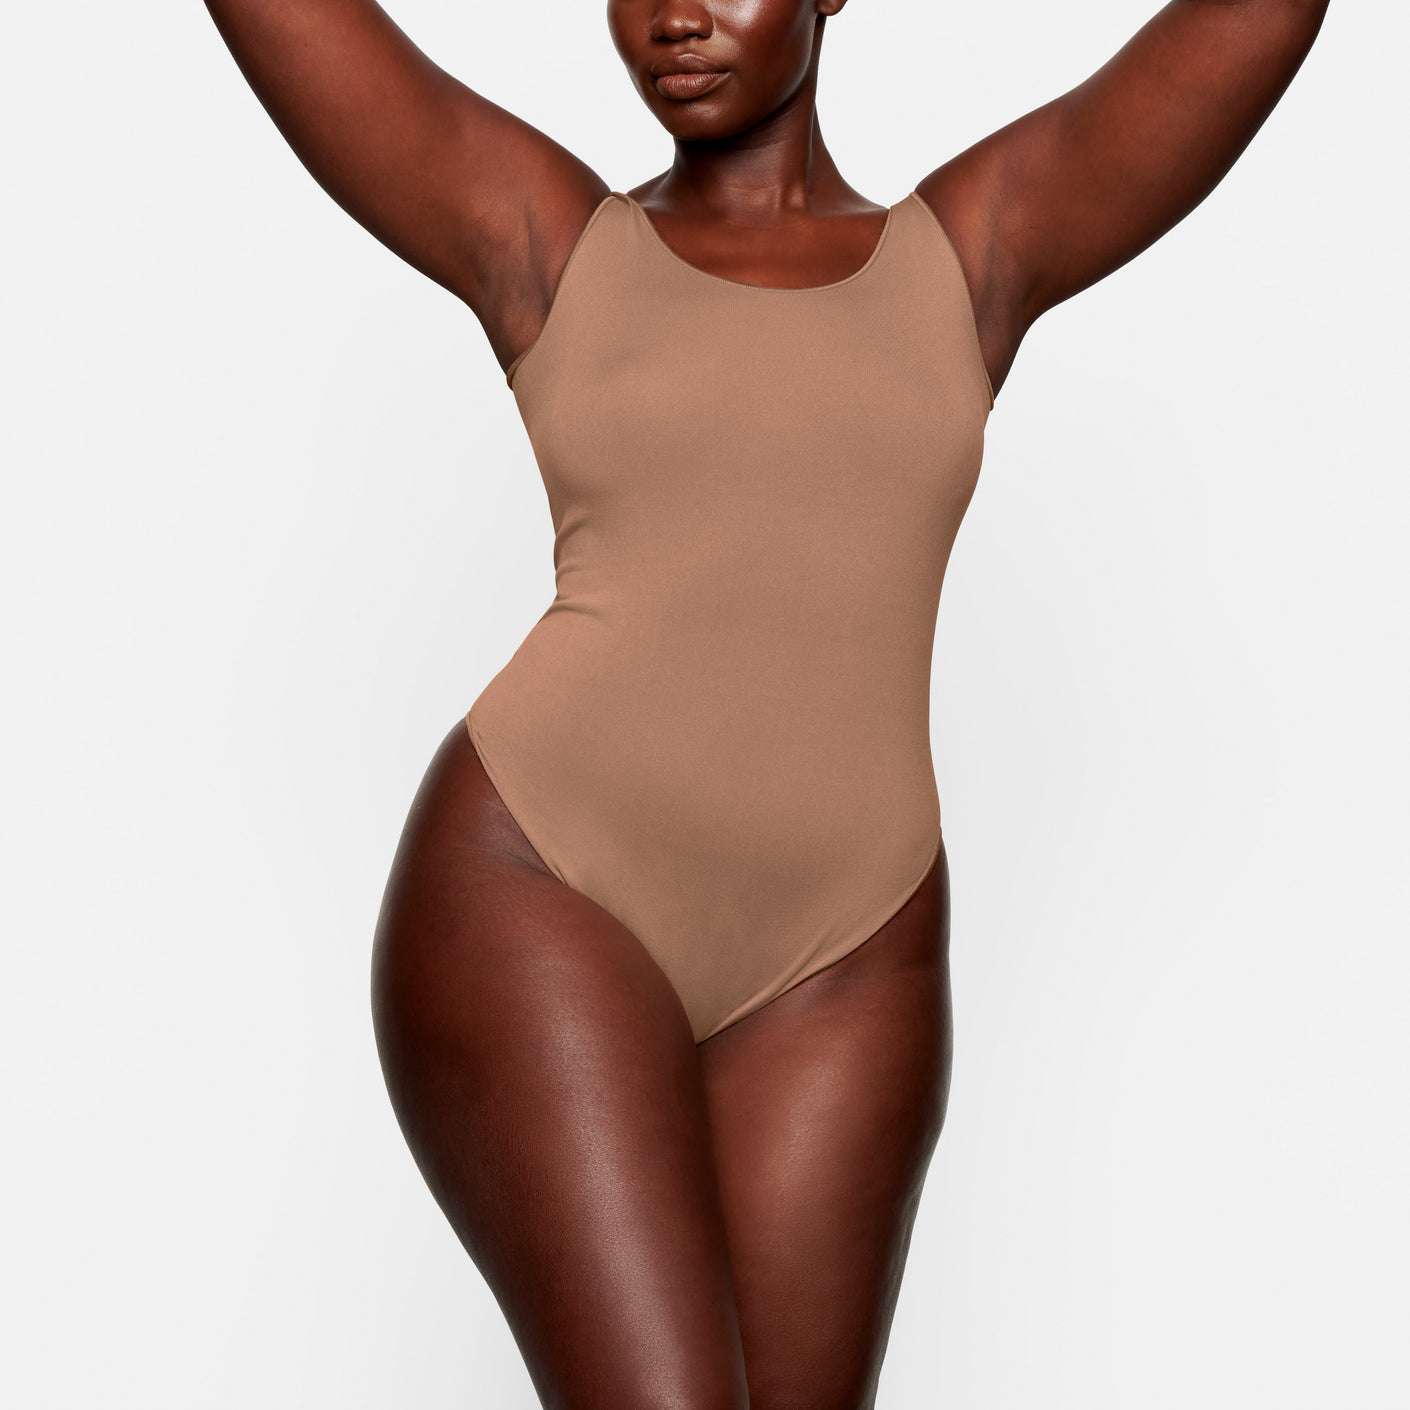 Track Faux Leather Scoop Bodysuit - Sienna - XS at Skims